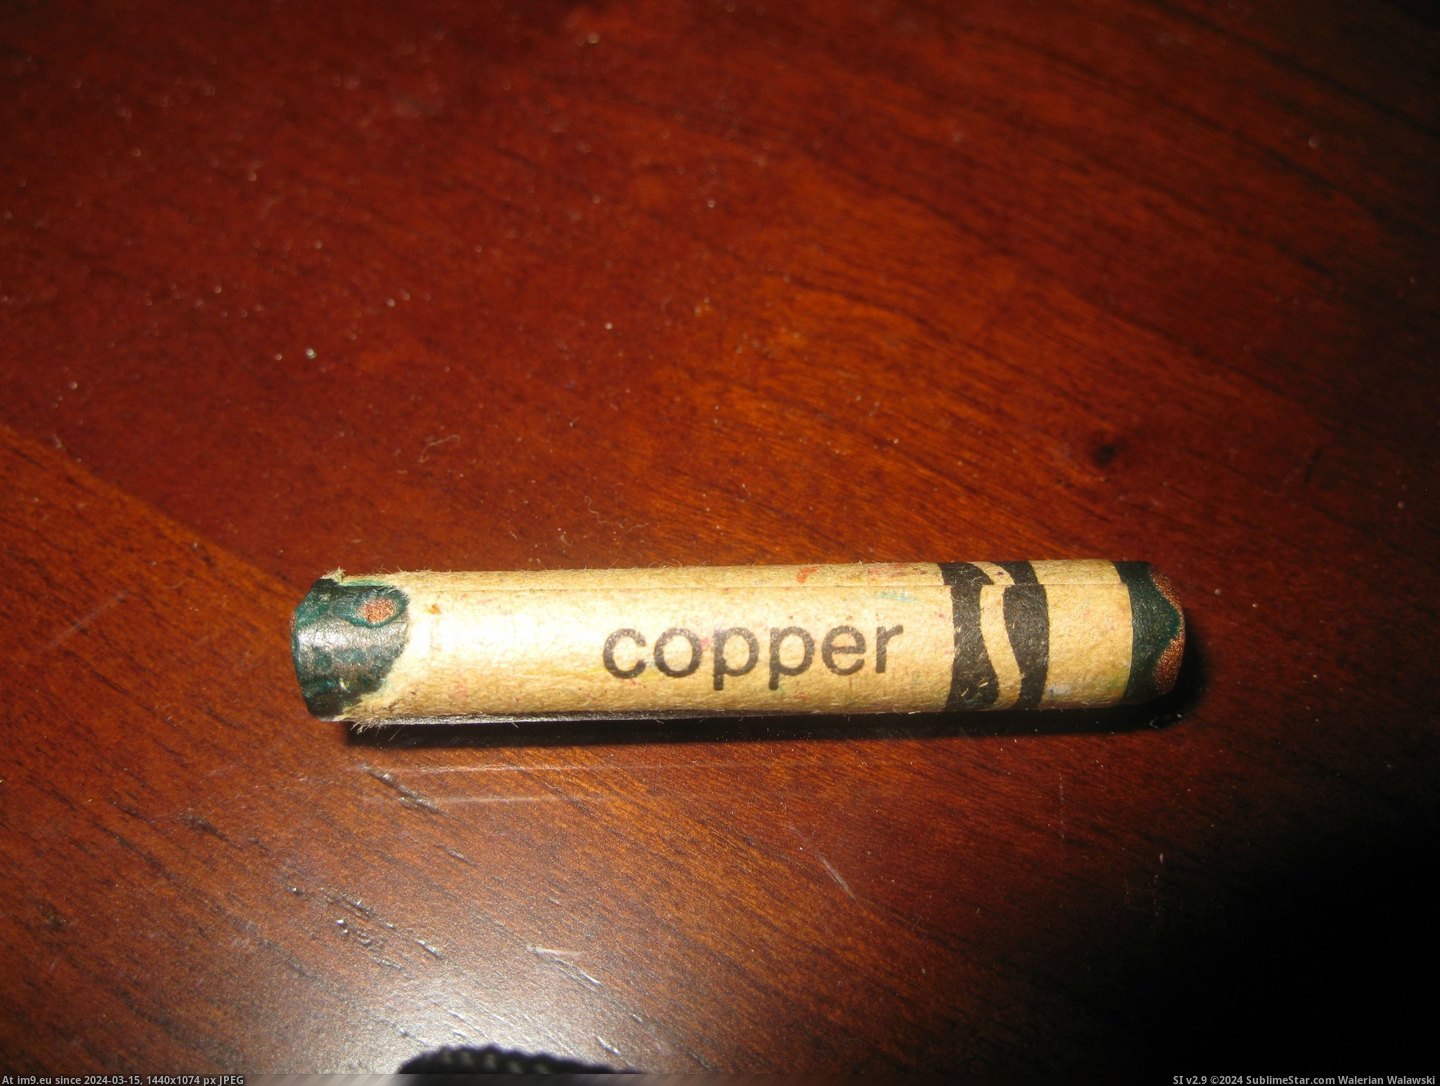 #Old #Can #Green #Copper #Tarnish #Turn #Colored #Crayons [Mildlyinteresting] Copper-colored crayons can actually tarnish and turn green if they're old enough 1 Pic. (Изображение из альбом My r/MILDLYINTERESTING favs))